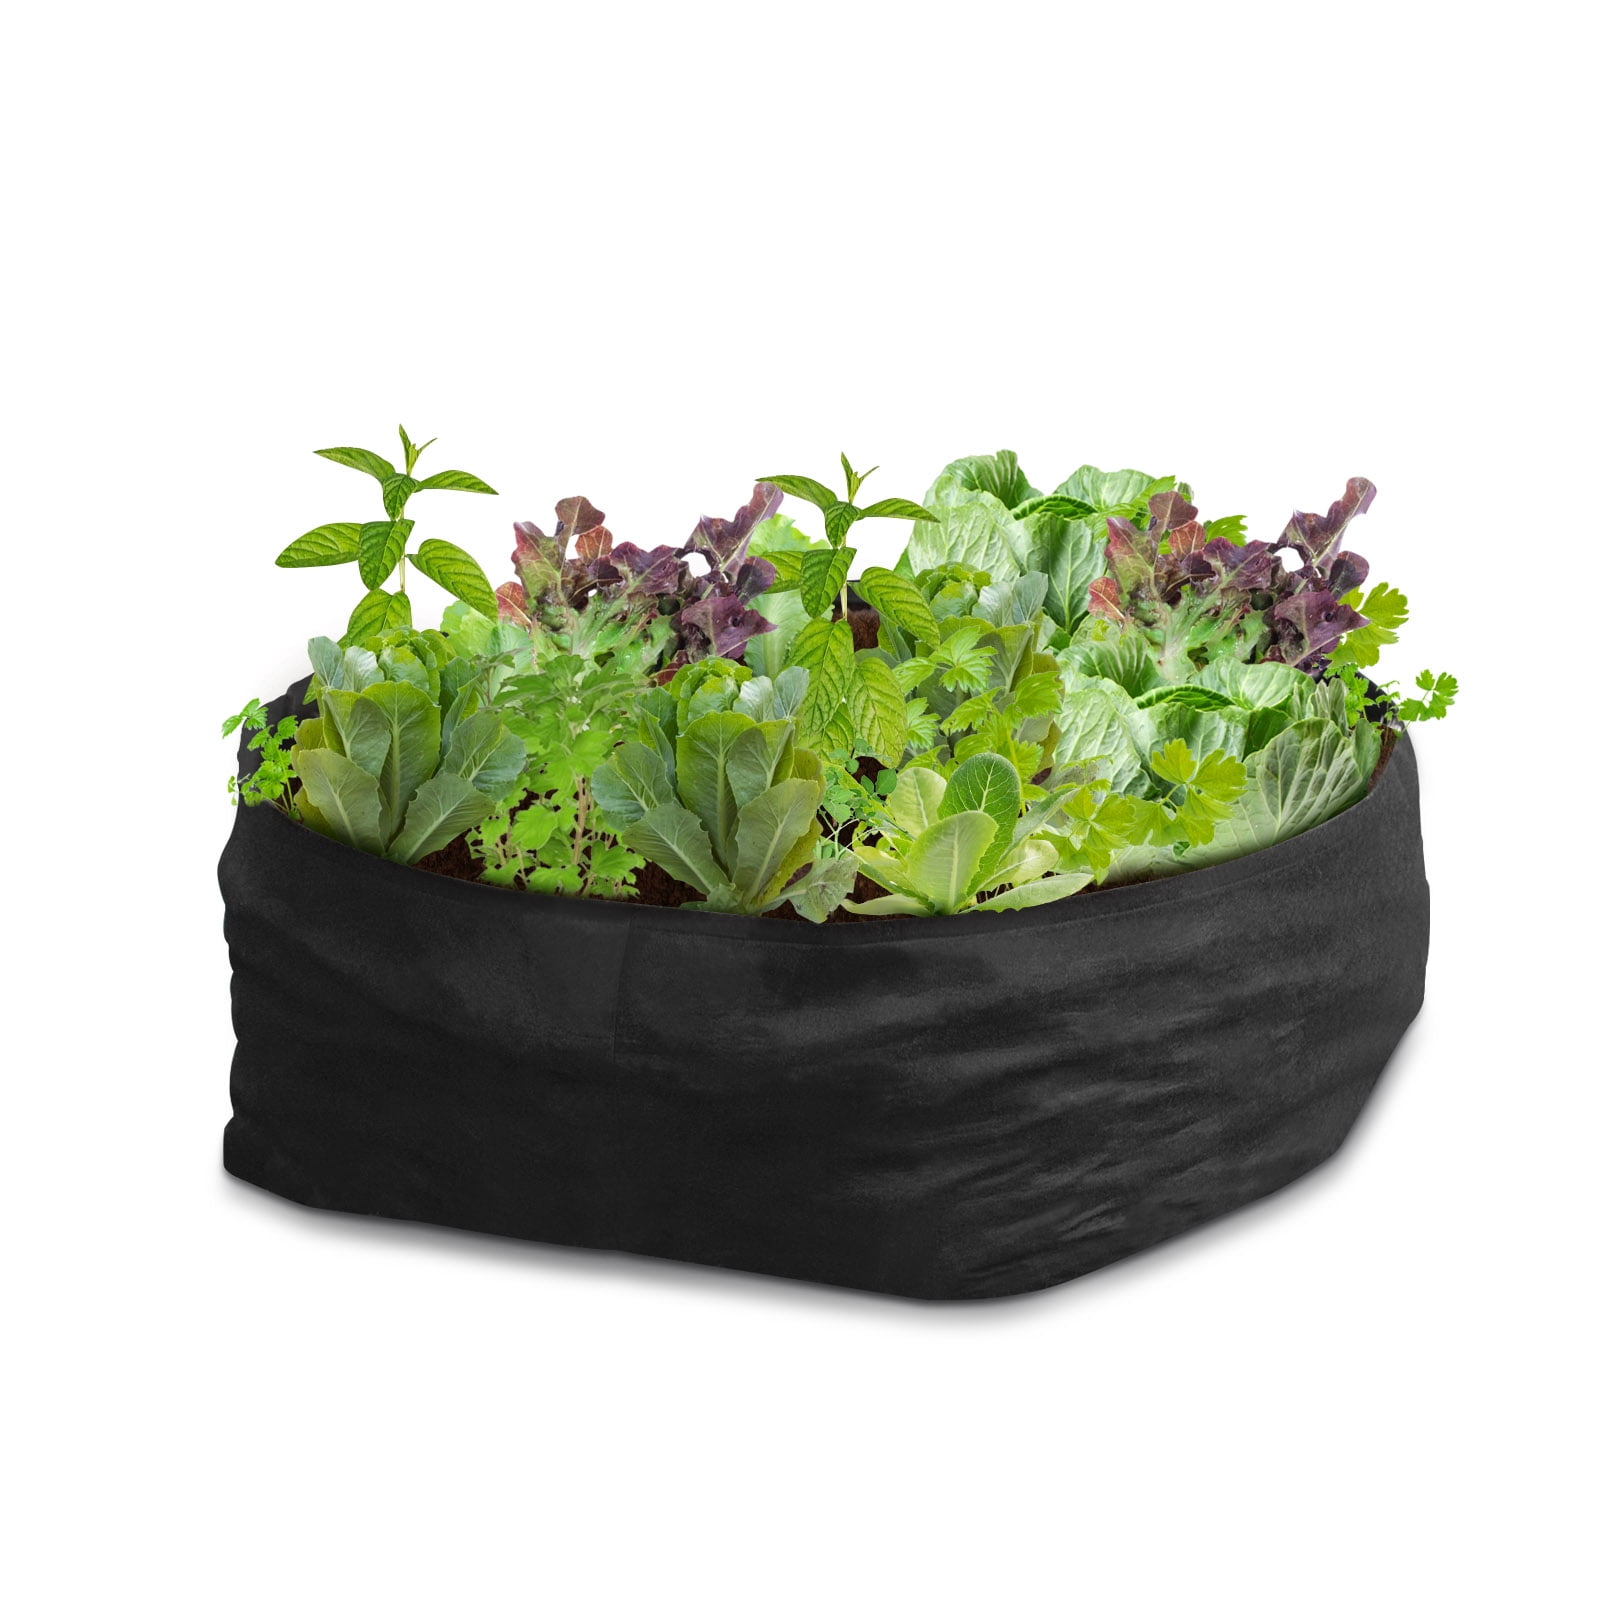 New 5pcs Green Hand Planting Bags Fabric Grow Bag Garden Square Plant Container 